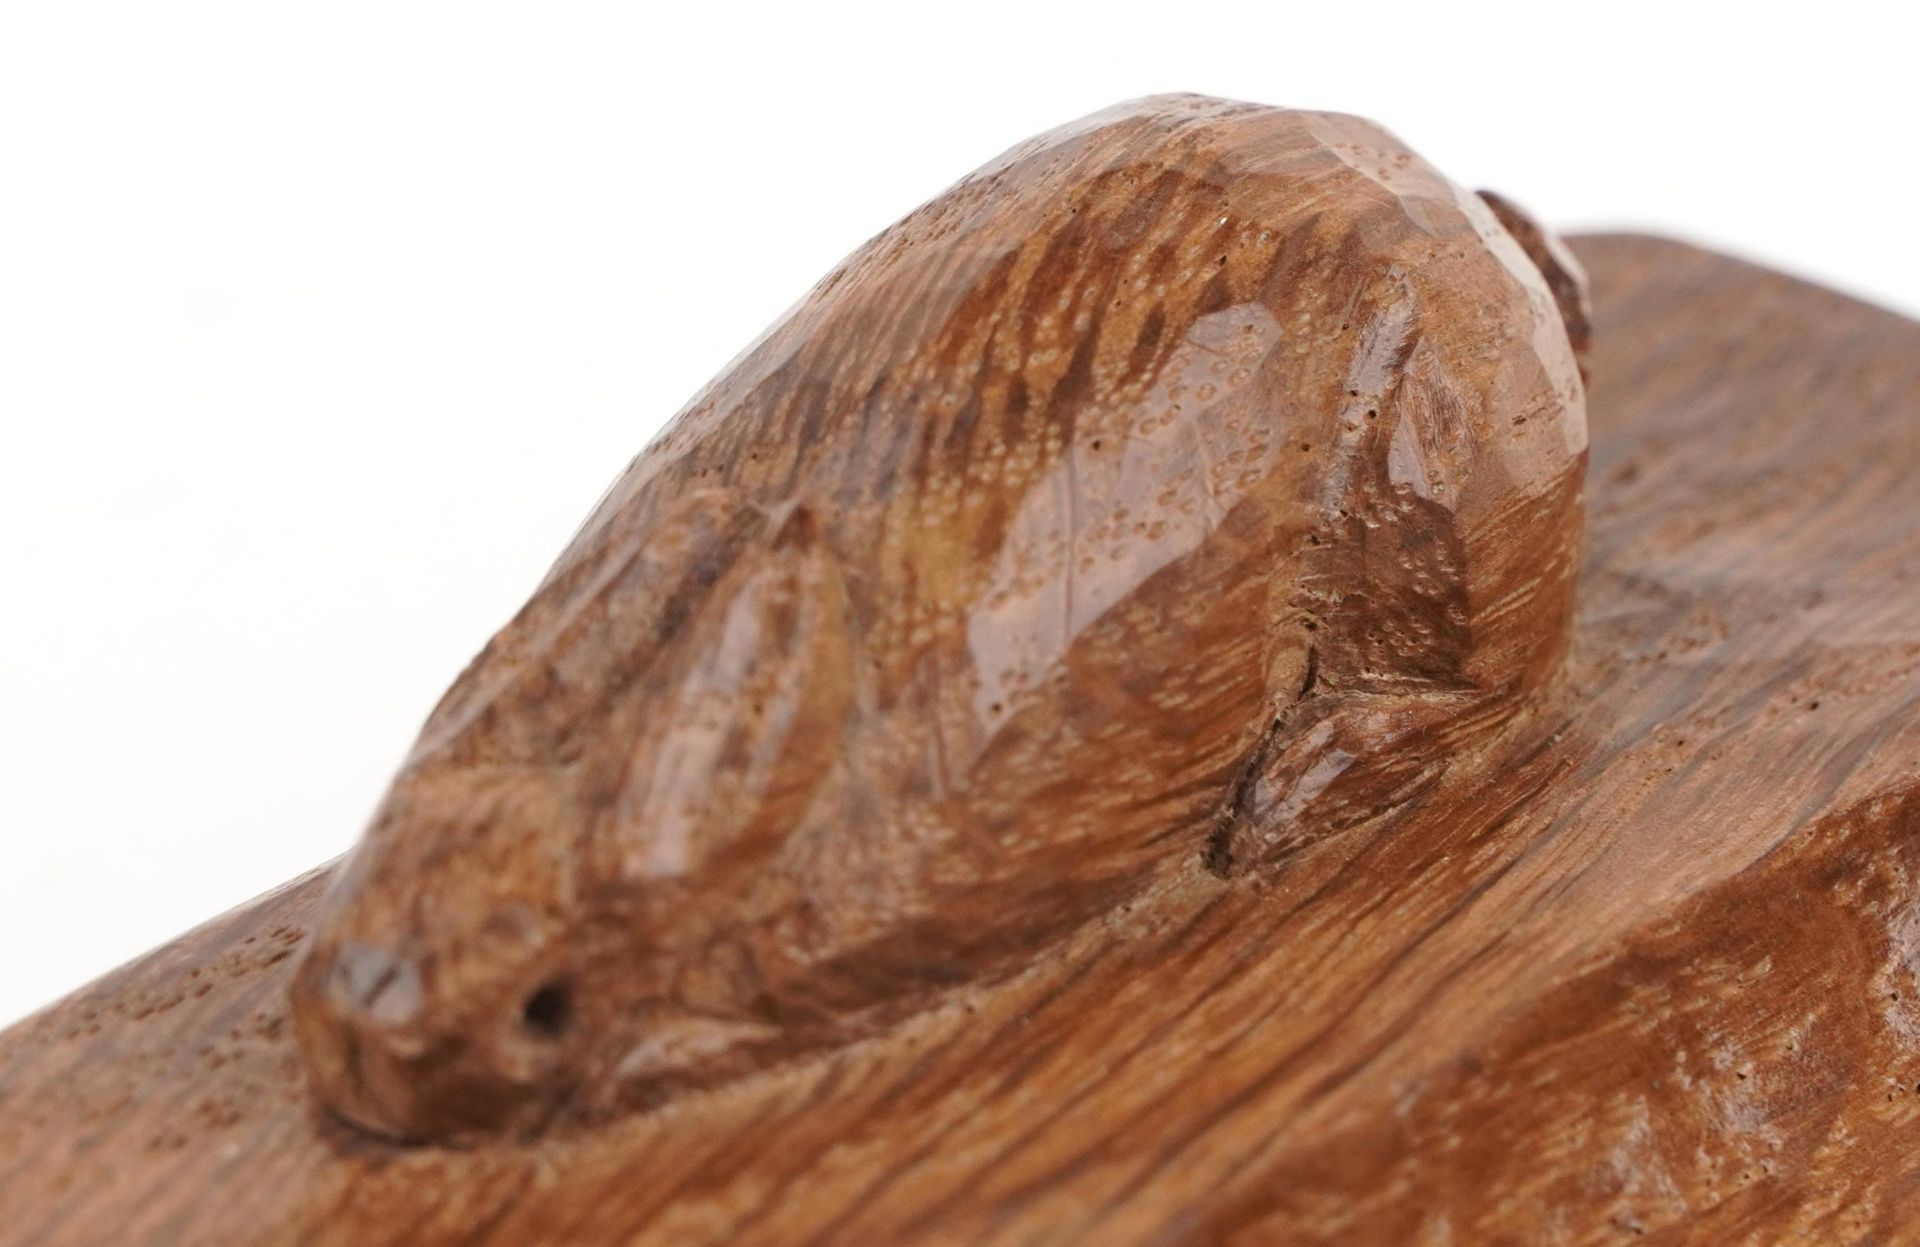 Peter Rabbitman Heap of Wetwang adzed oak ashtray carved with a rabbit, 10cm wide - Image 4 of 4